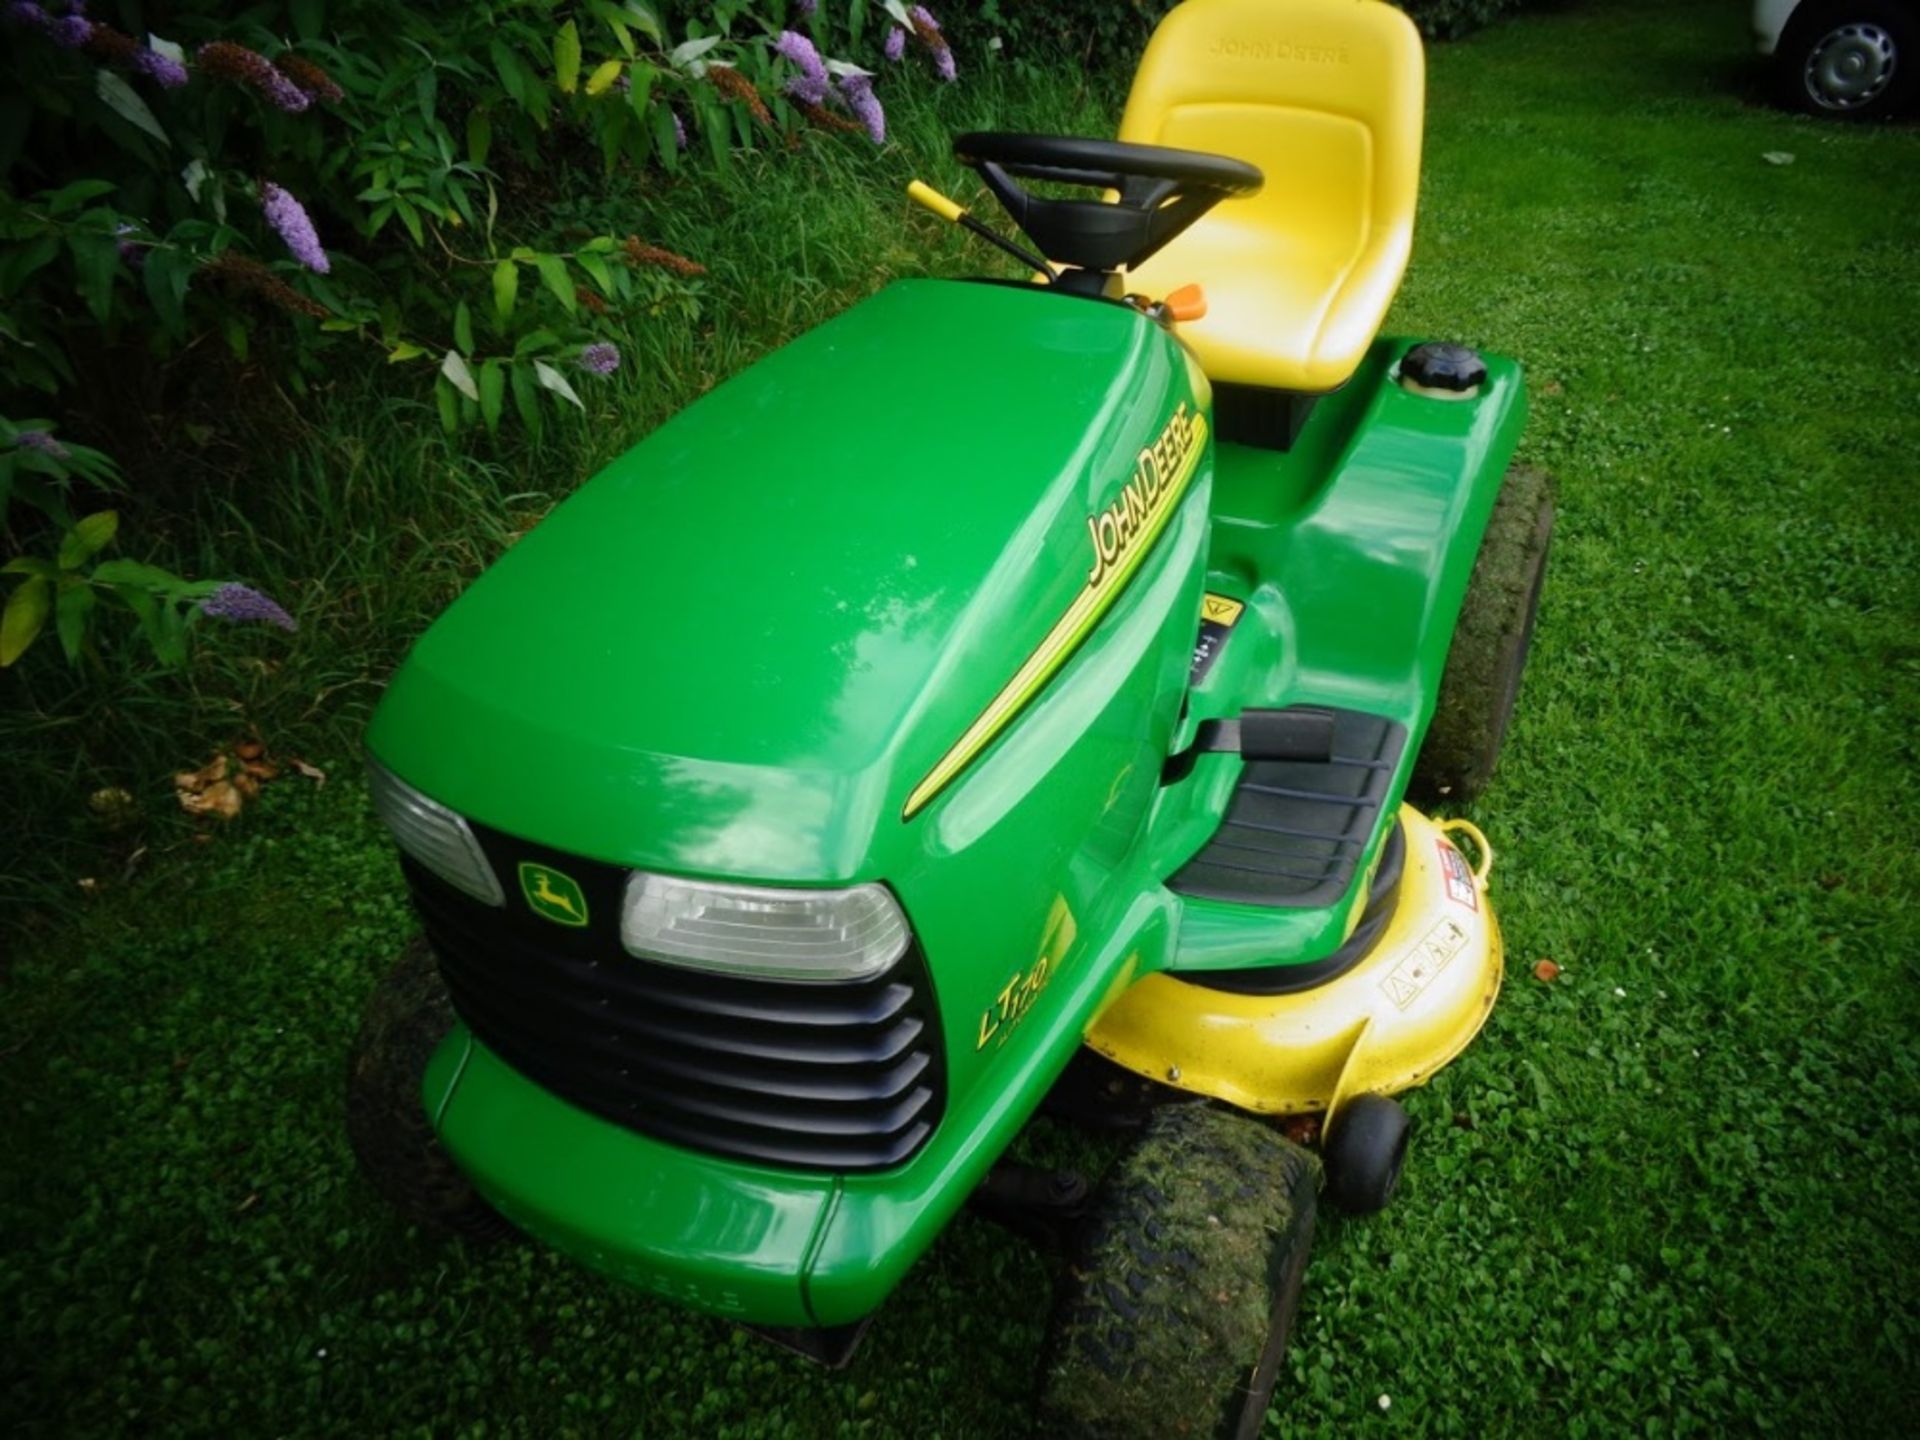 John Deere LT170 Ride on Mulch Mower with a 42 Inch Freedom deck. - Image 4 of 5